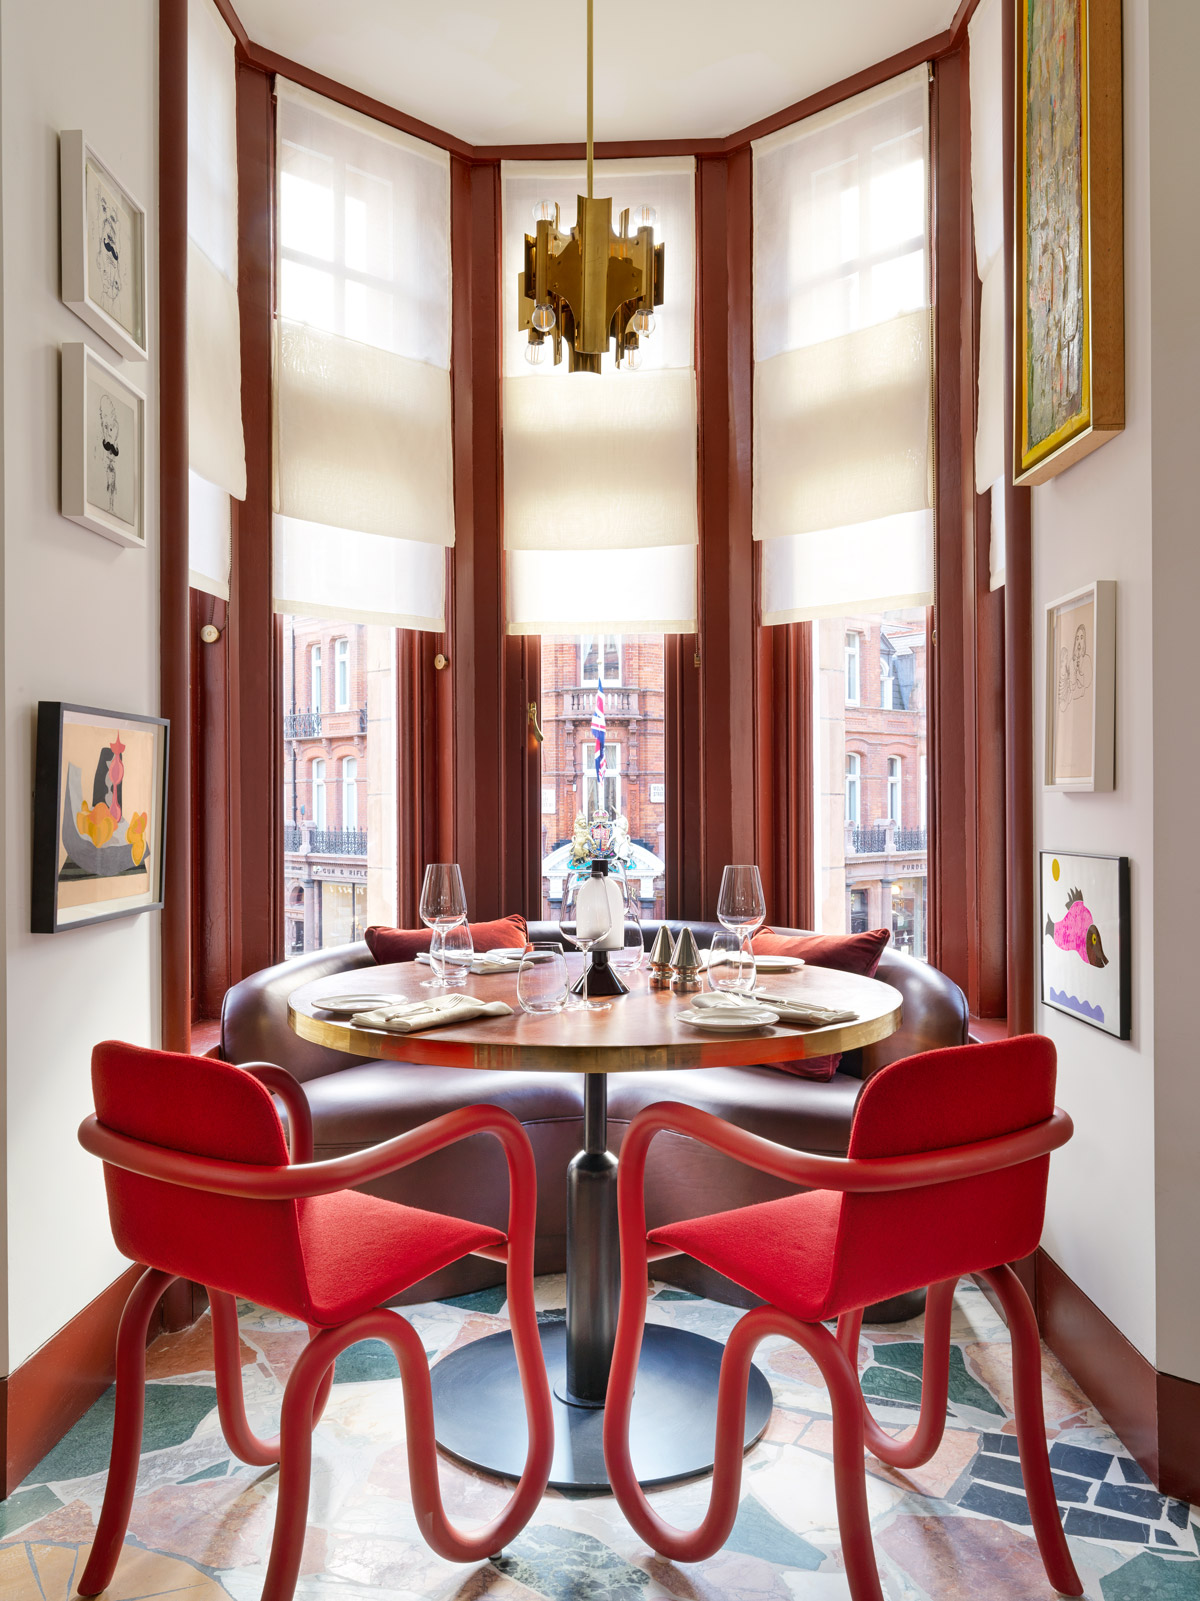 A dining table with red chairs and round sofa